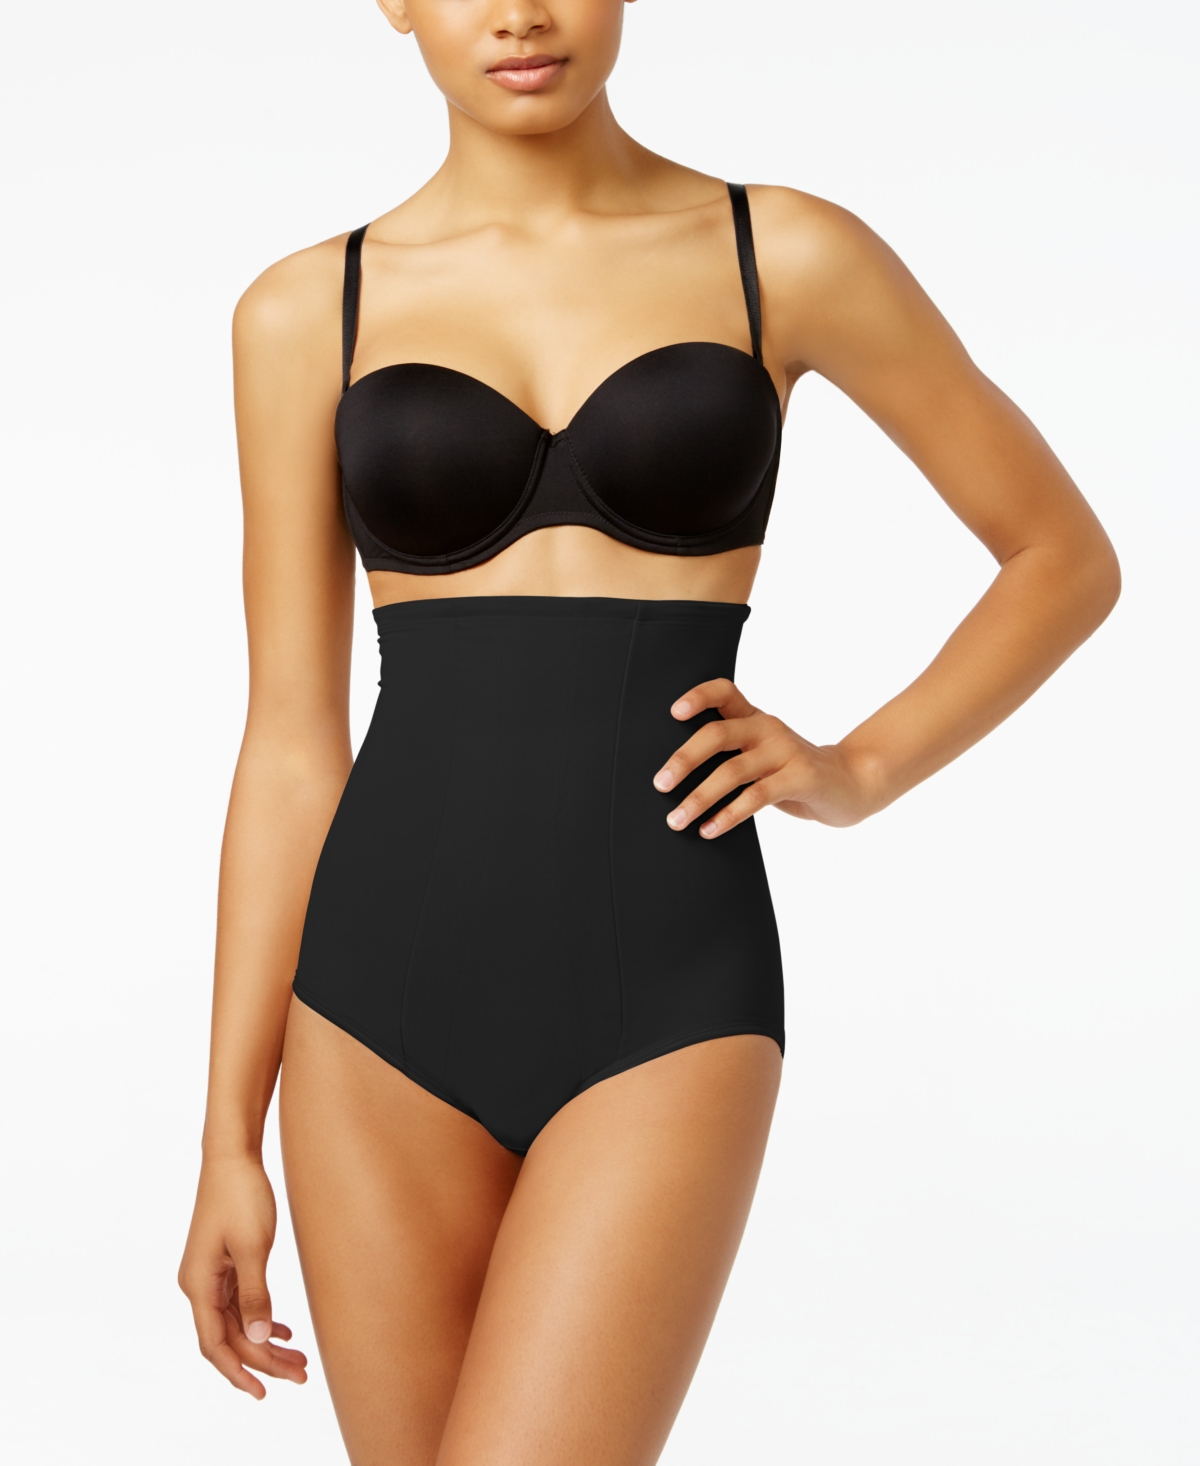 UPC 080225106534 product image for Miraclesuit Women's Extra Firm Tummy-Control High Waist Brief 2705 | upcitemdb.com